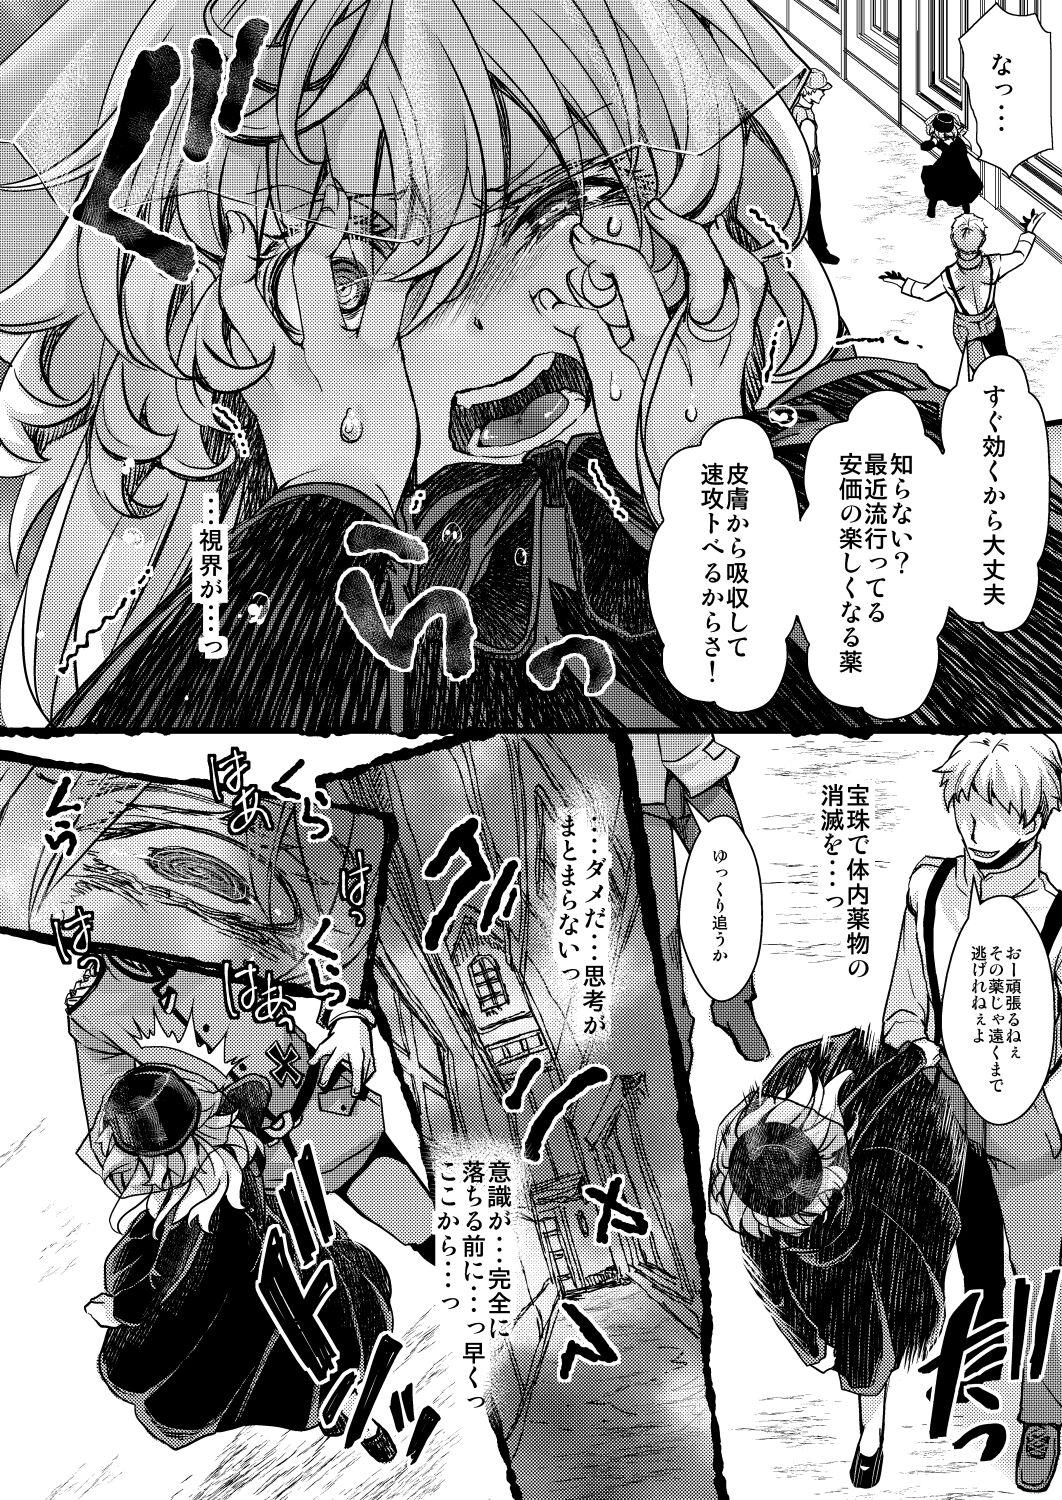 Wet Cunt Rugs - Youjo senki | saga of tanya the evil Gay Party - Page 6